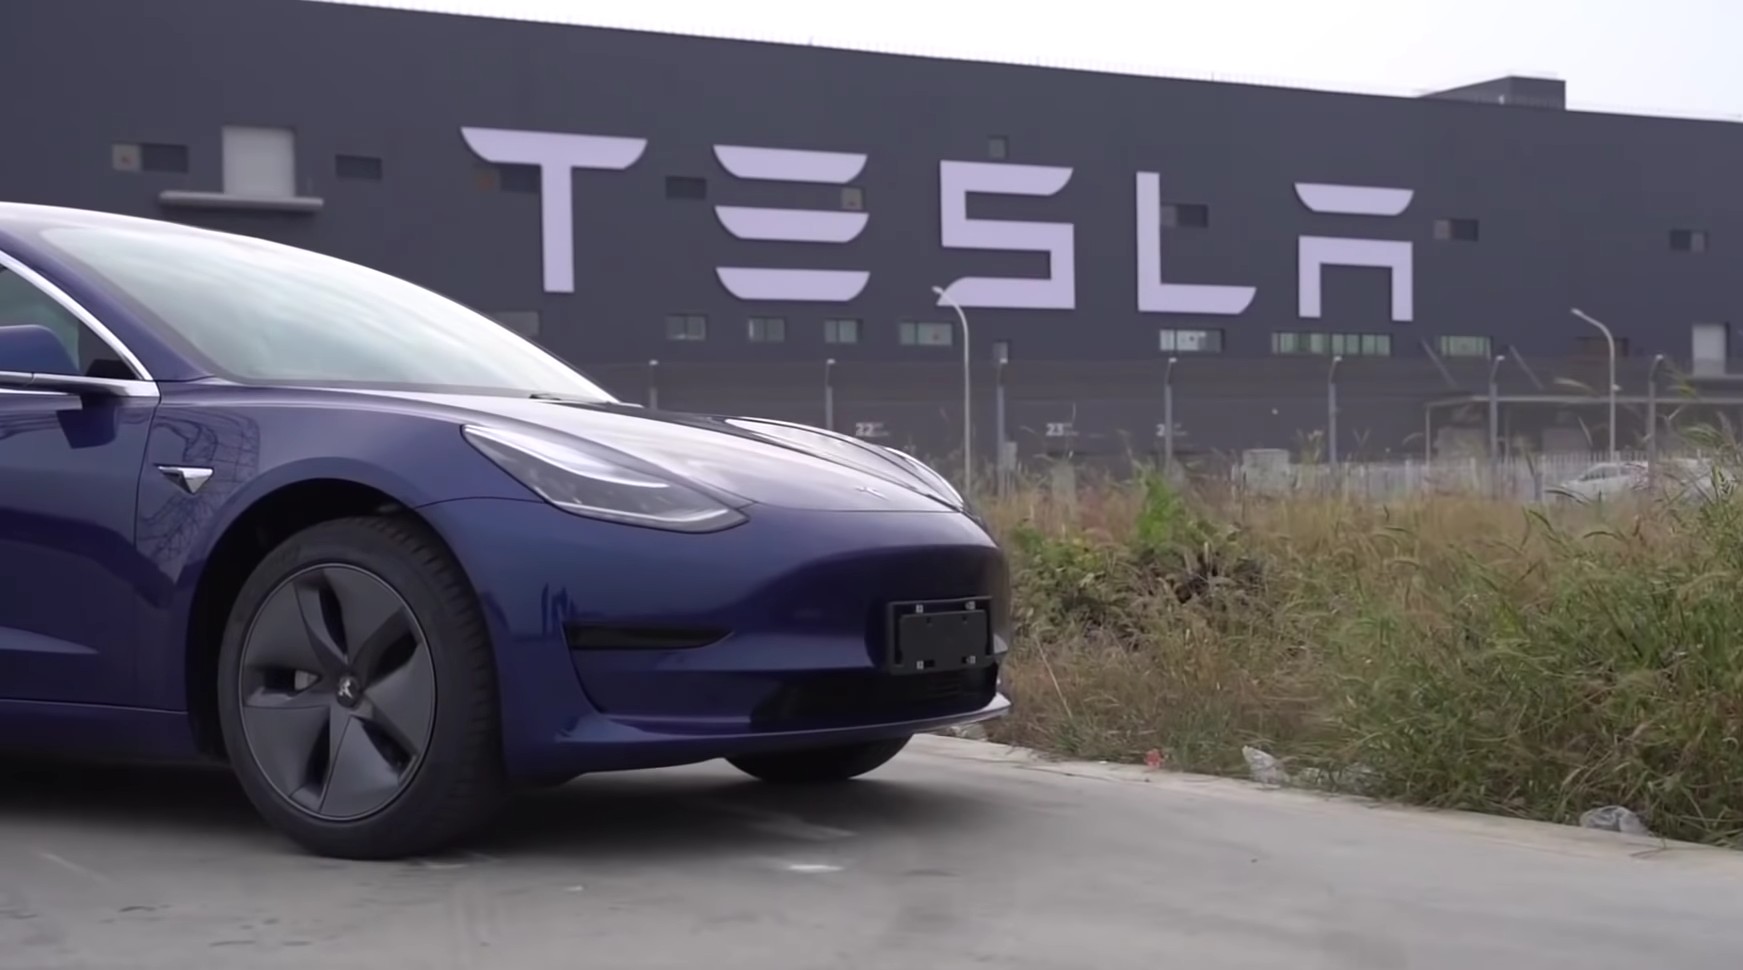 Tesla sees bigger opportunity in China as more aggressive EV goals are enacted for 2025